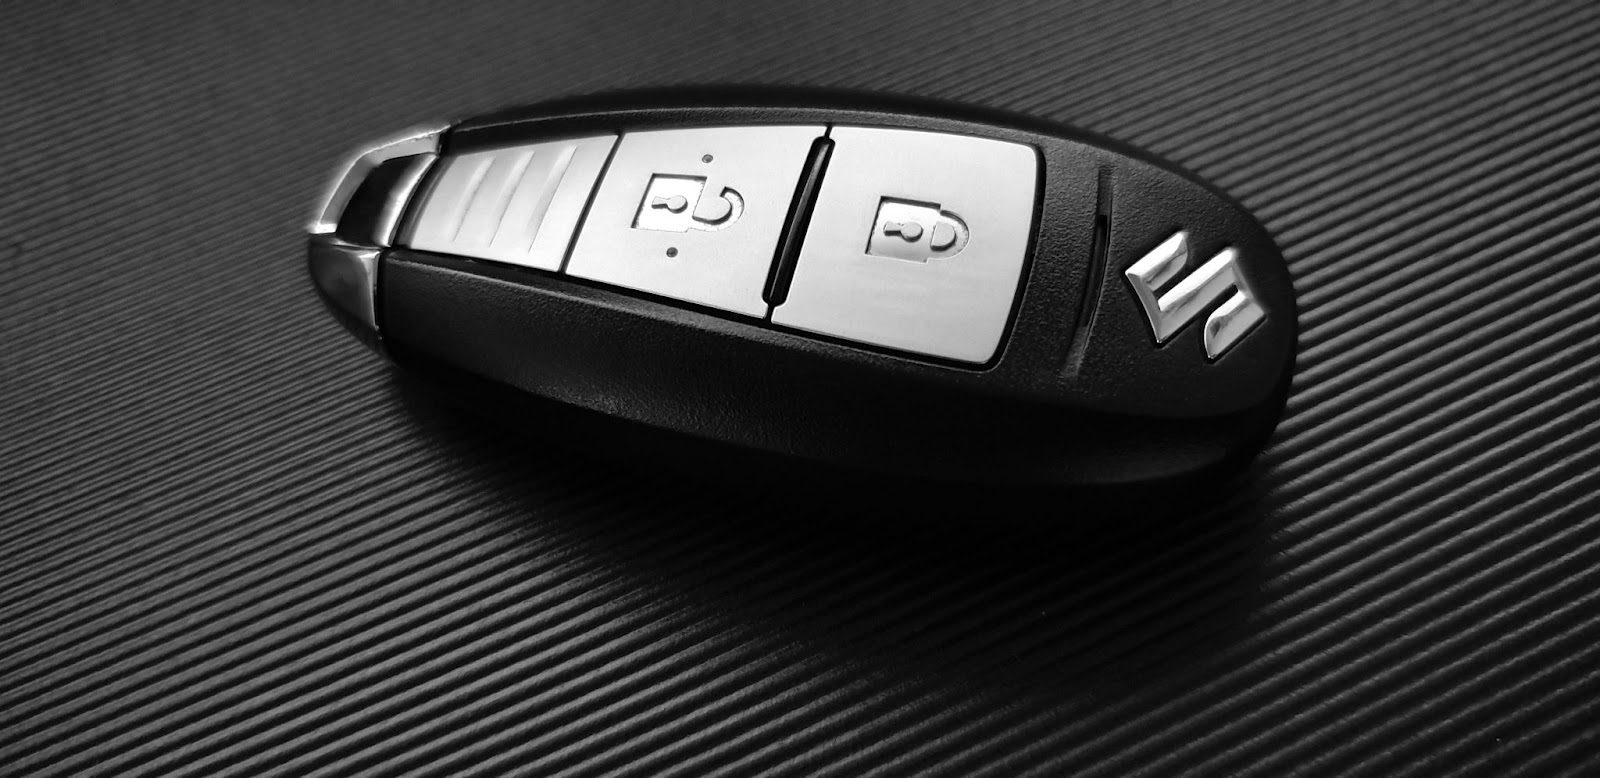 A close-up picture of a car key